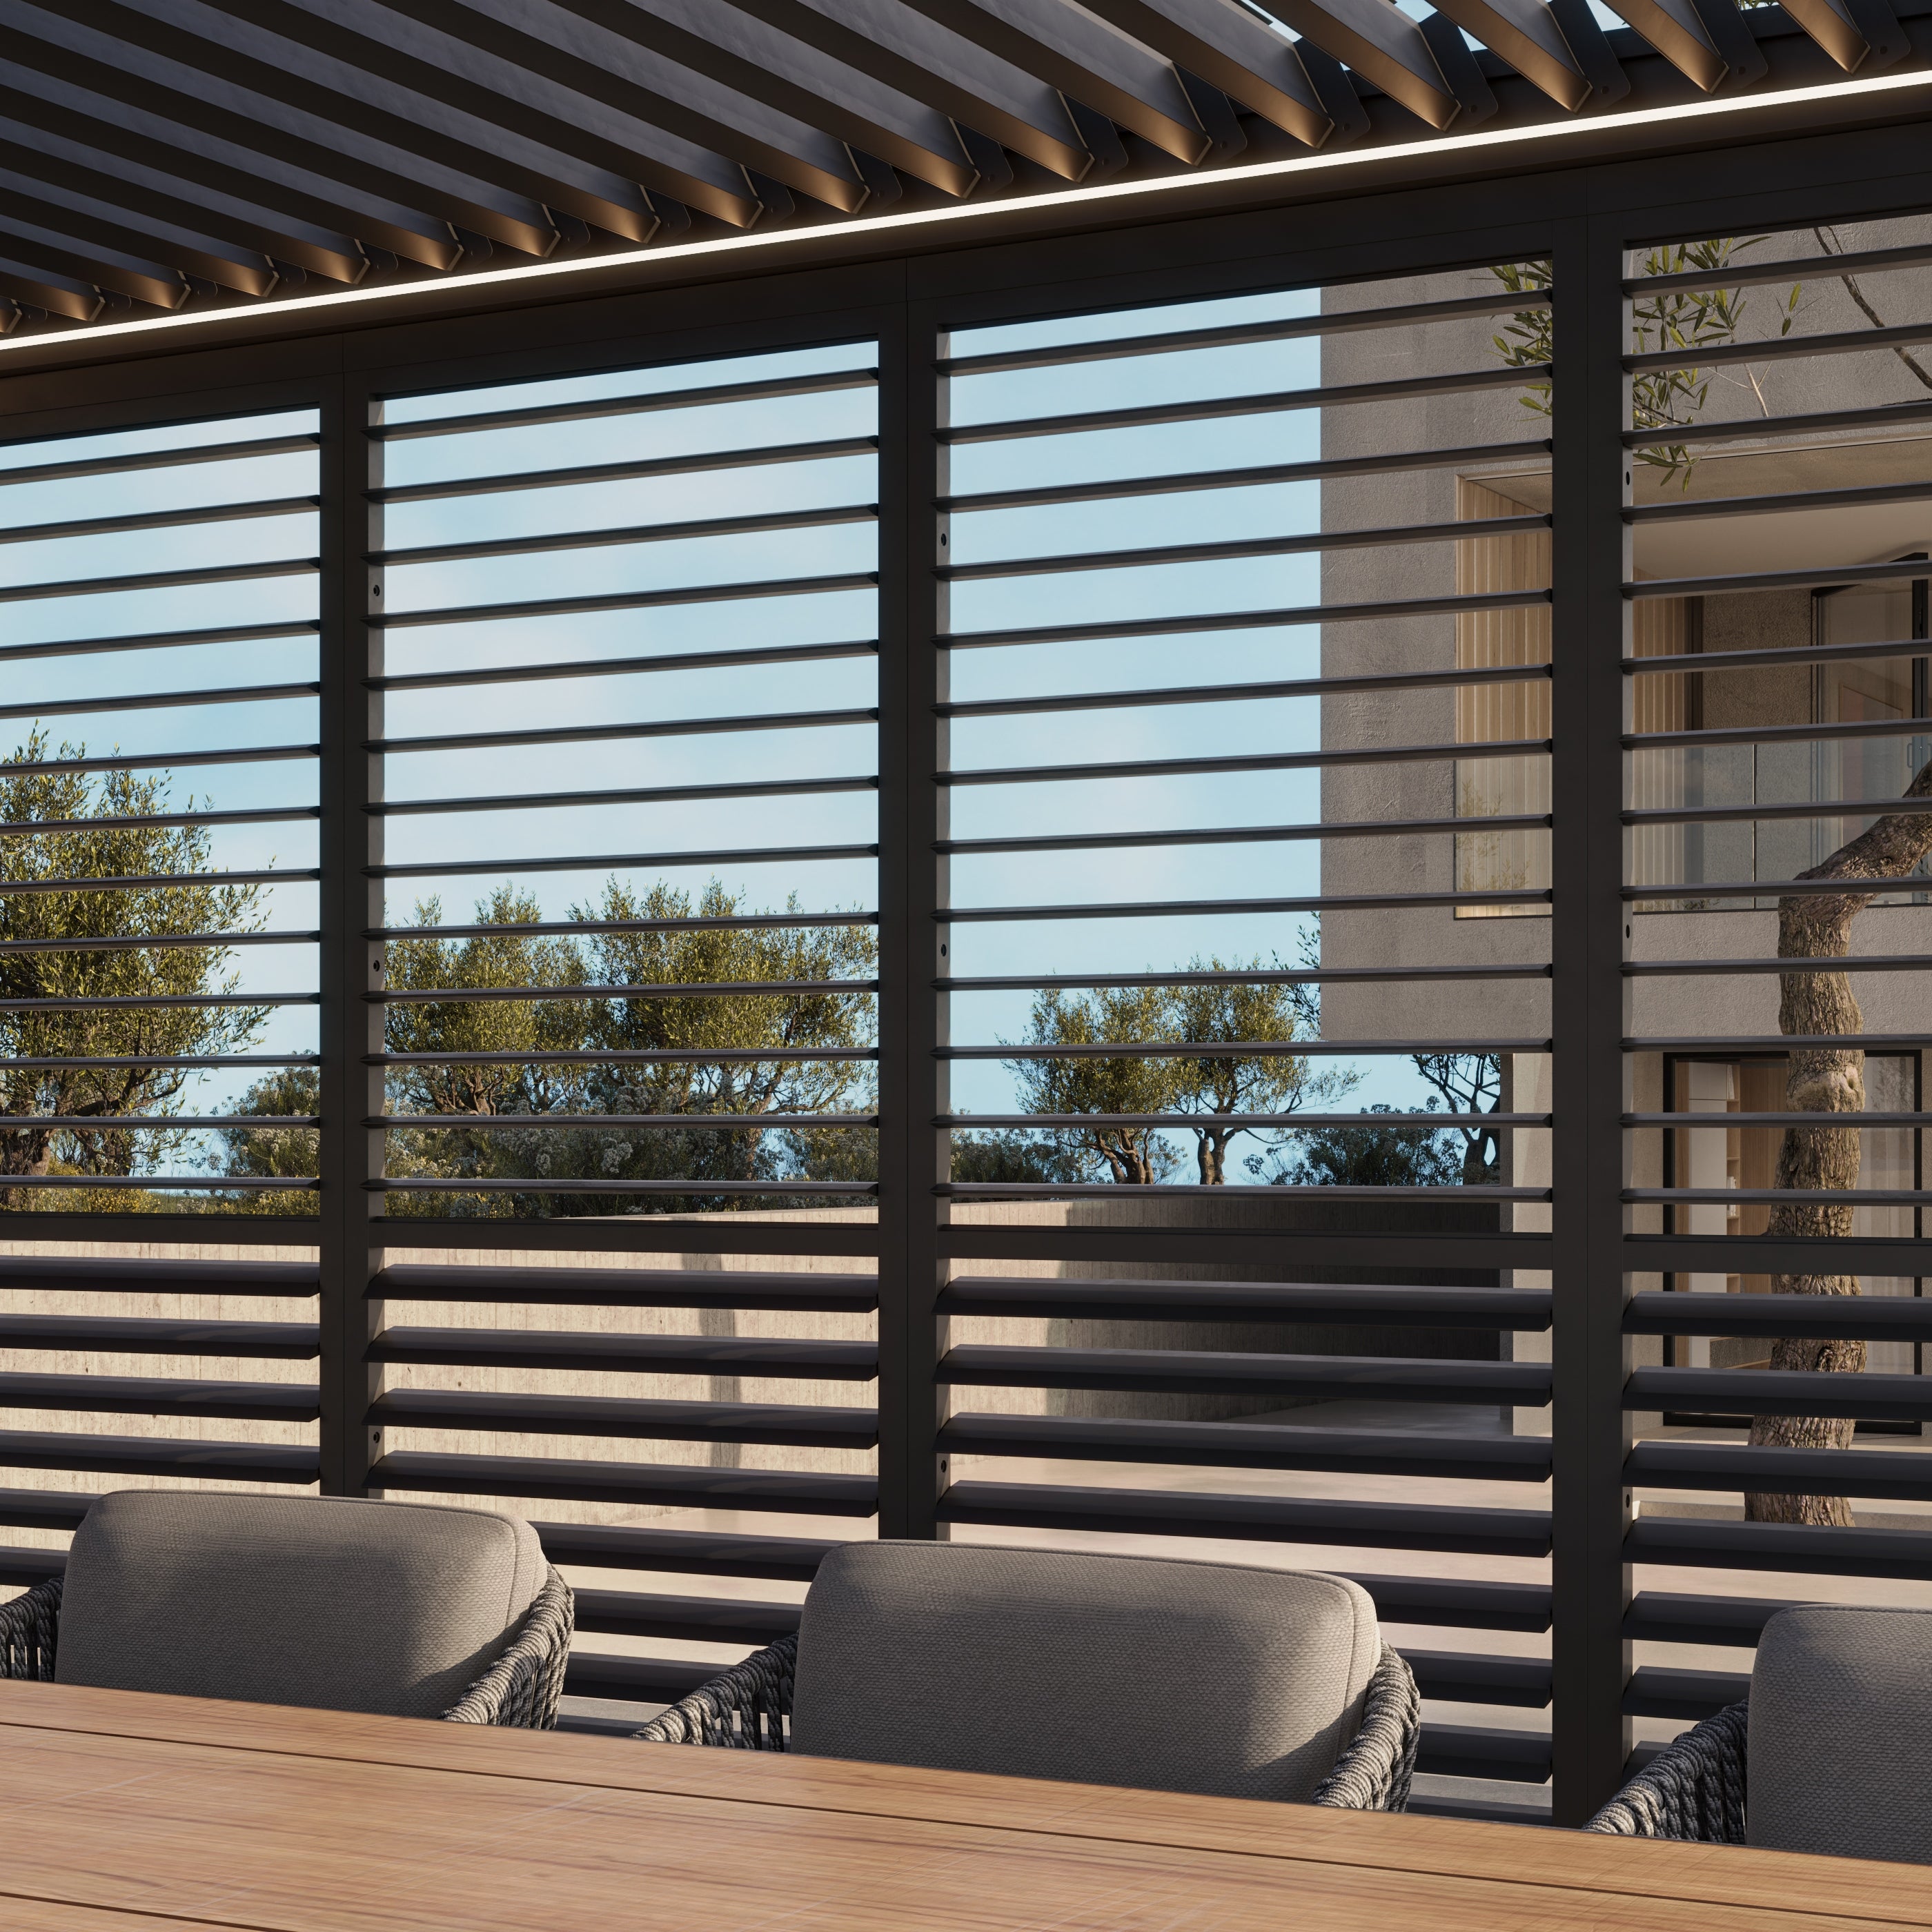 Suns Lifestyle-Luxe Retractable Roof Pergola with LED Lighting